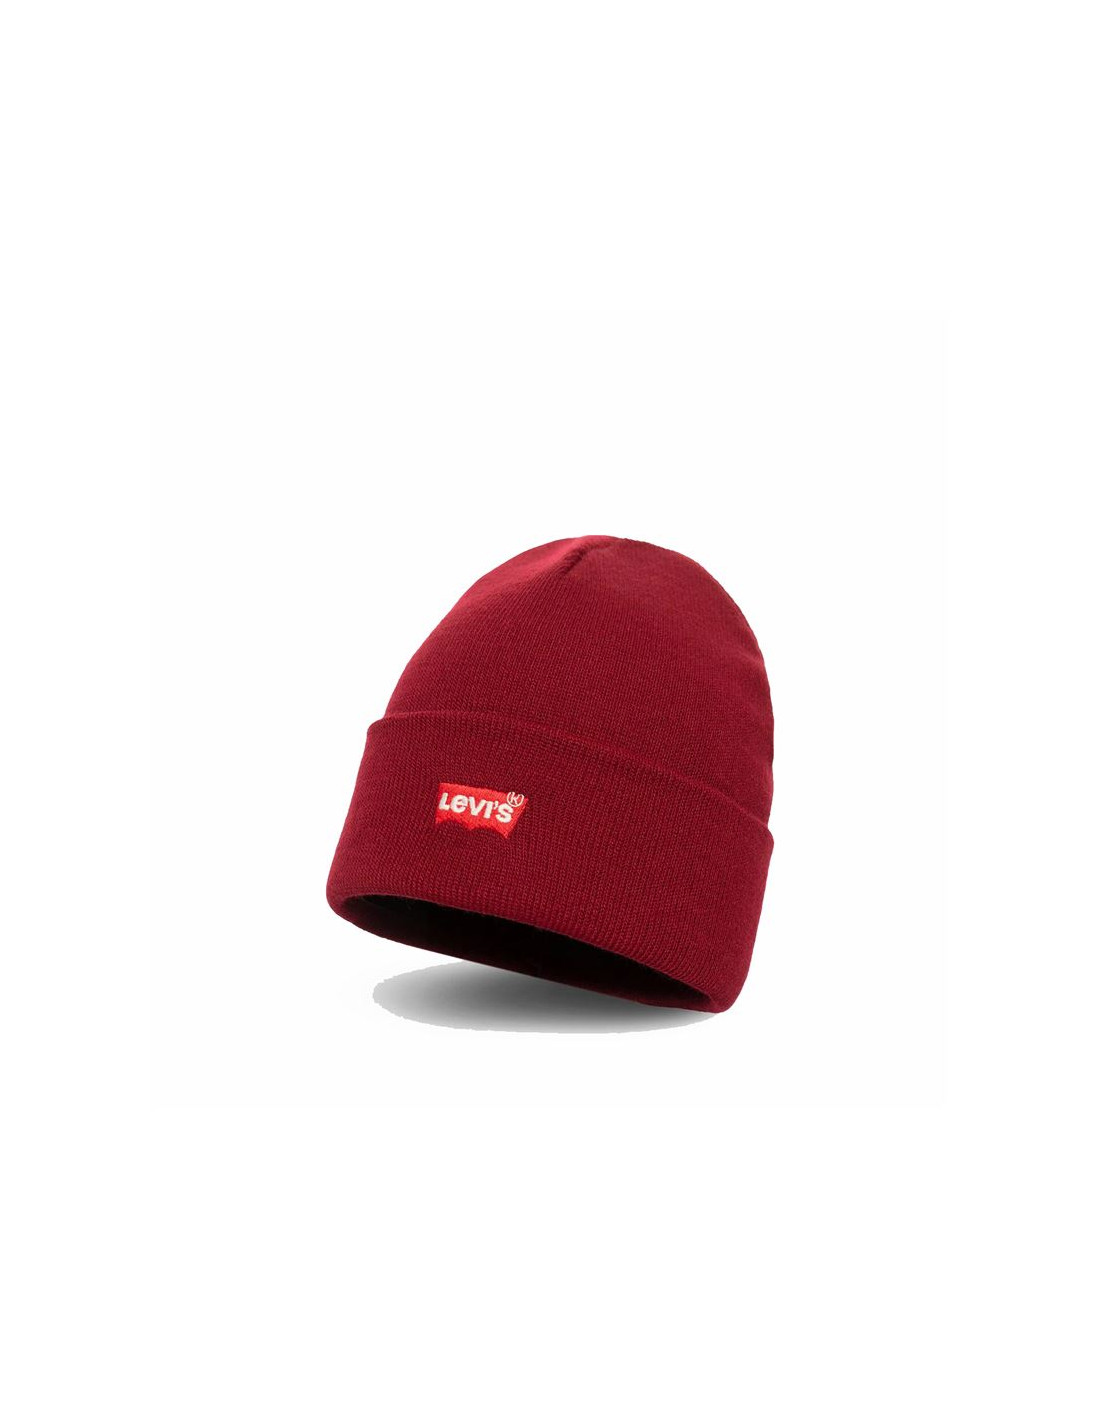 Gorro levi's red batwing embroidered beanie dark bordeaux product